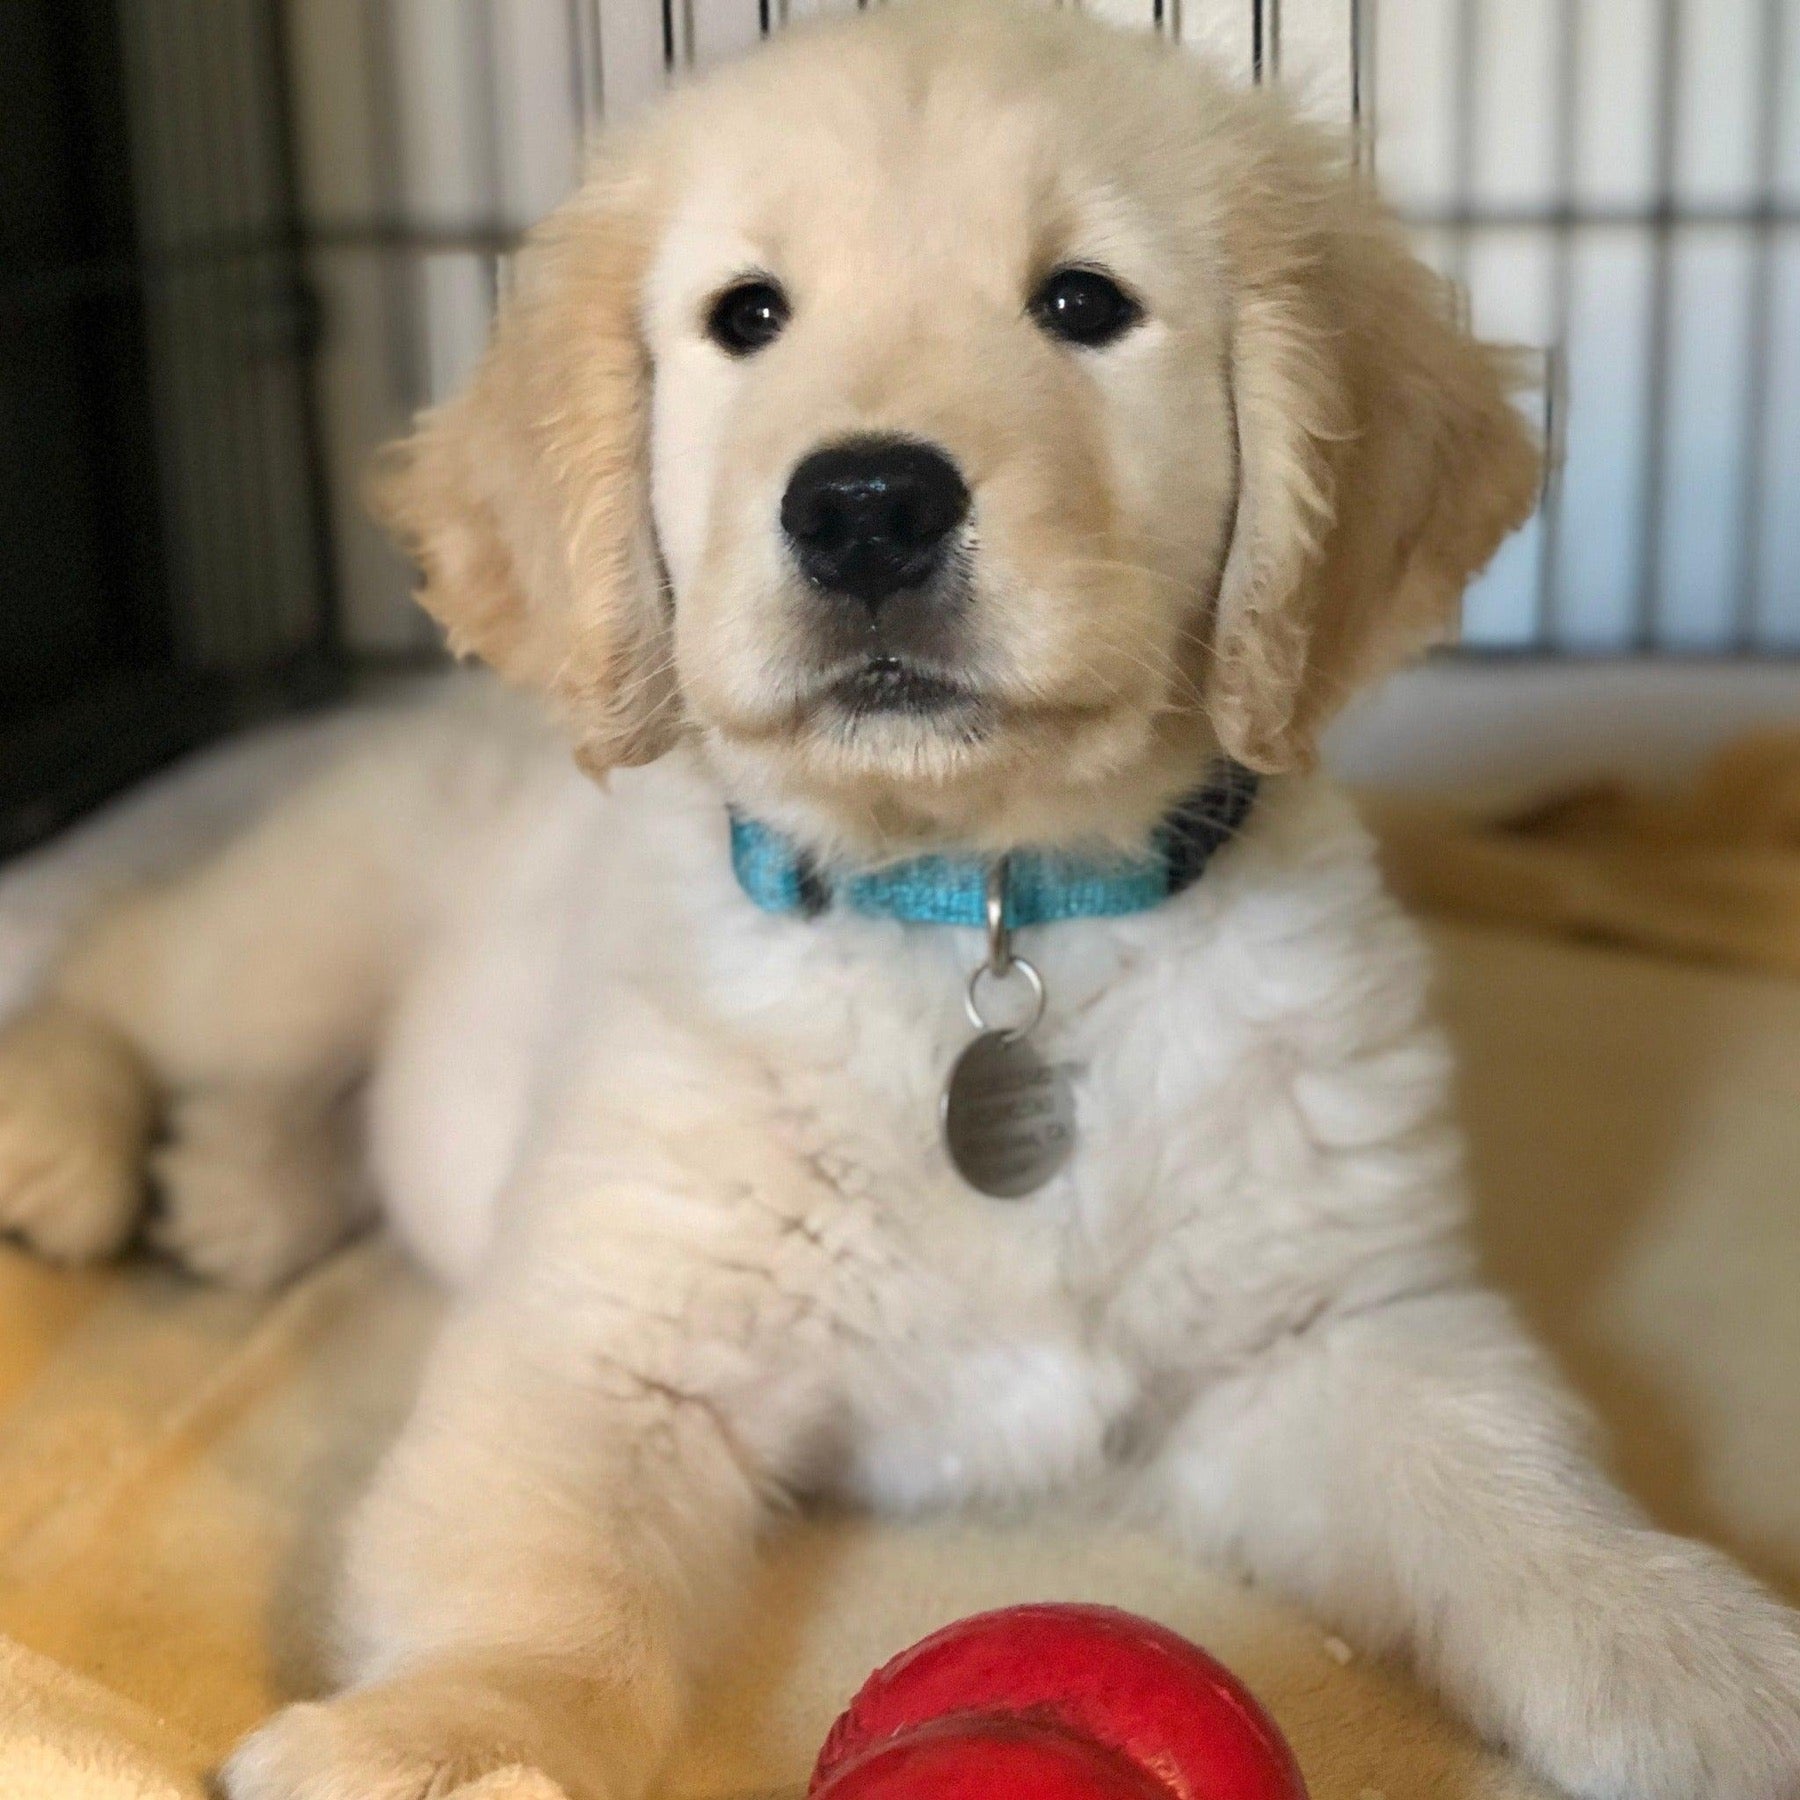 a photo of a golden retriever puppy in a crate with a red kong